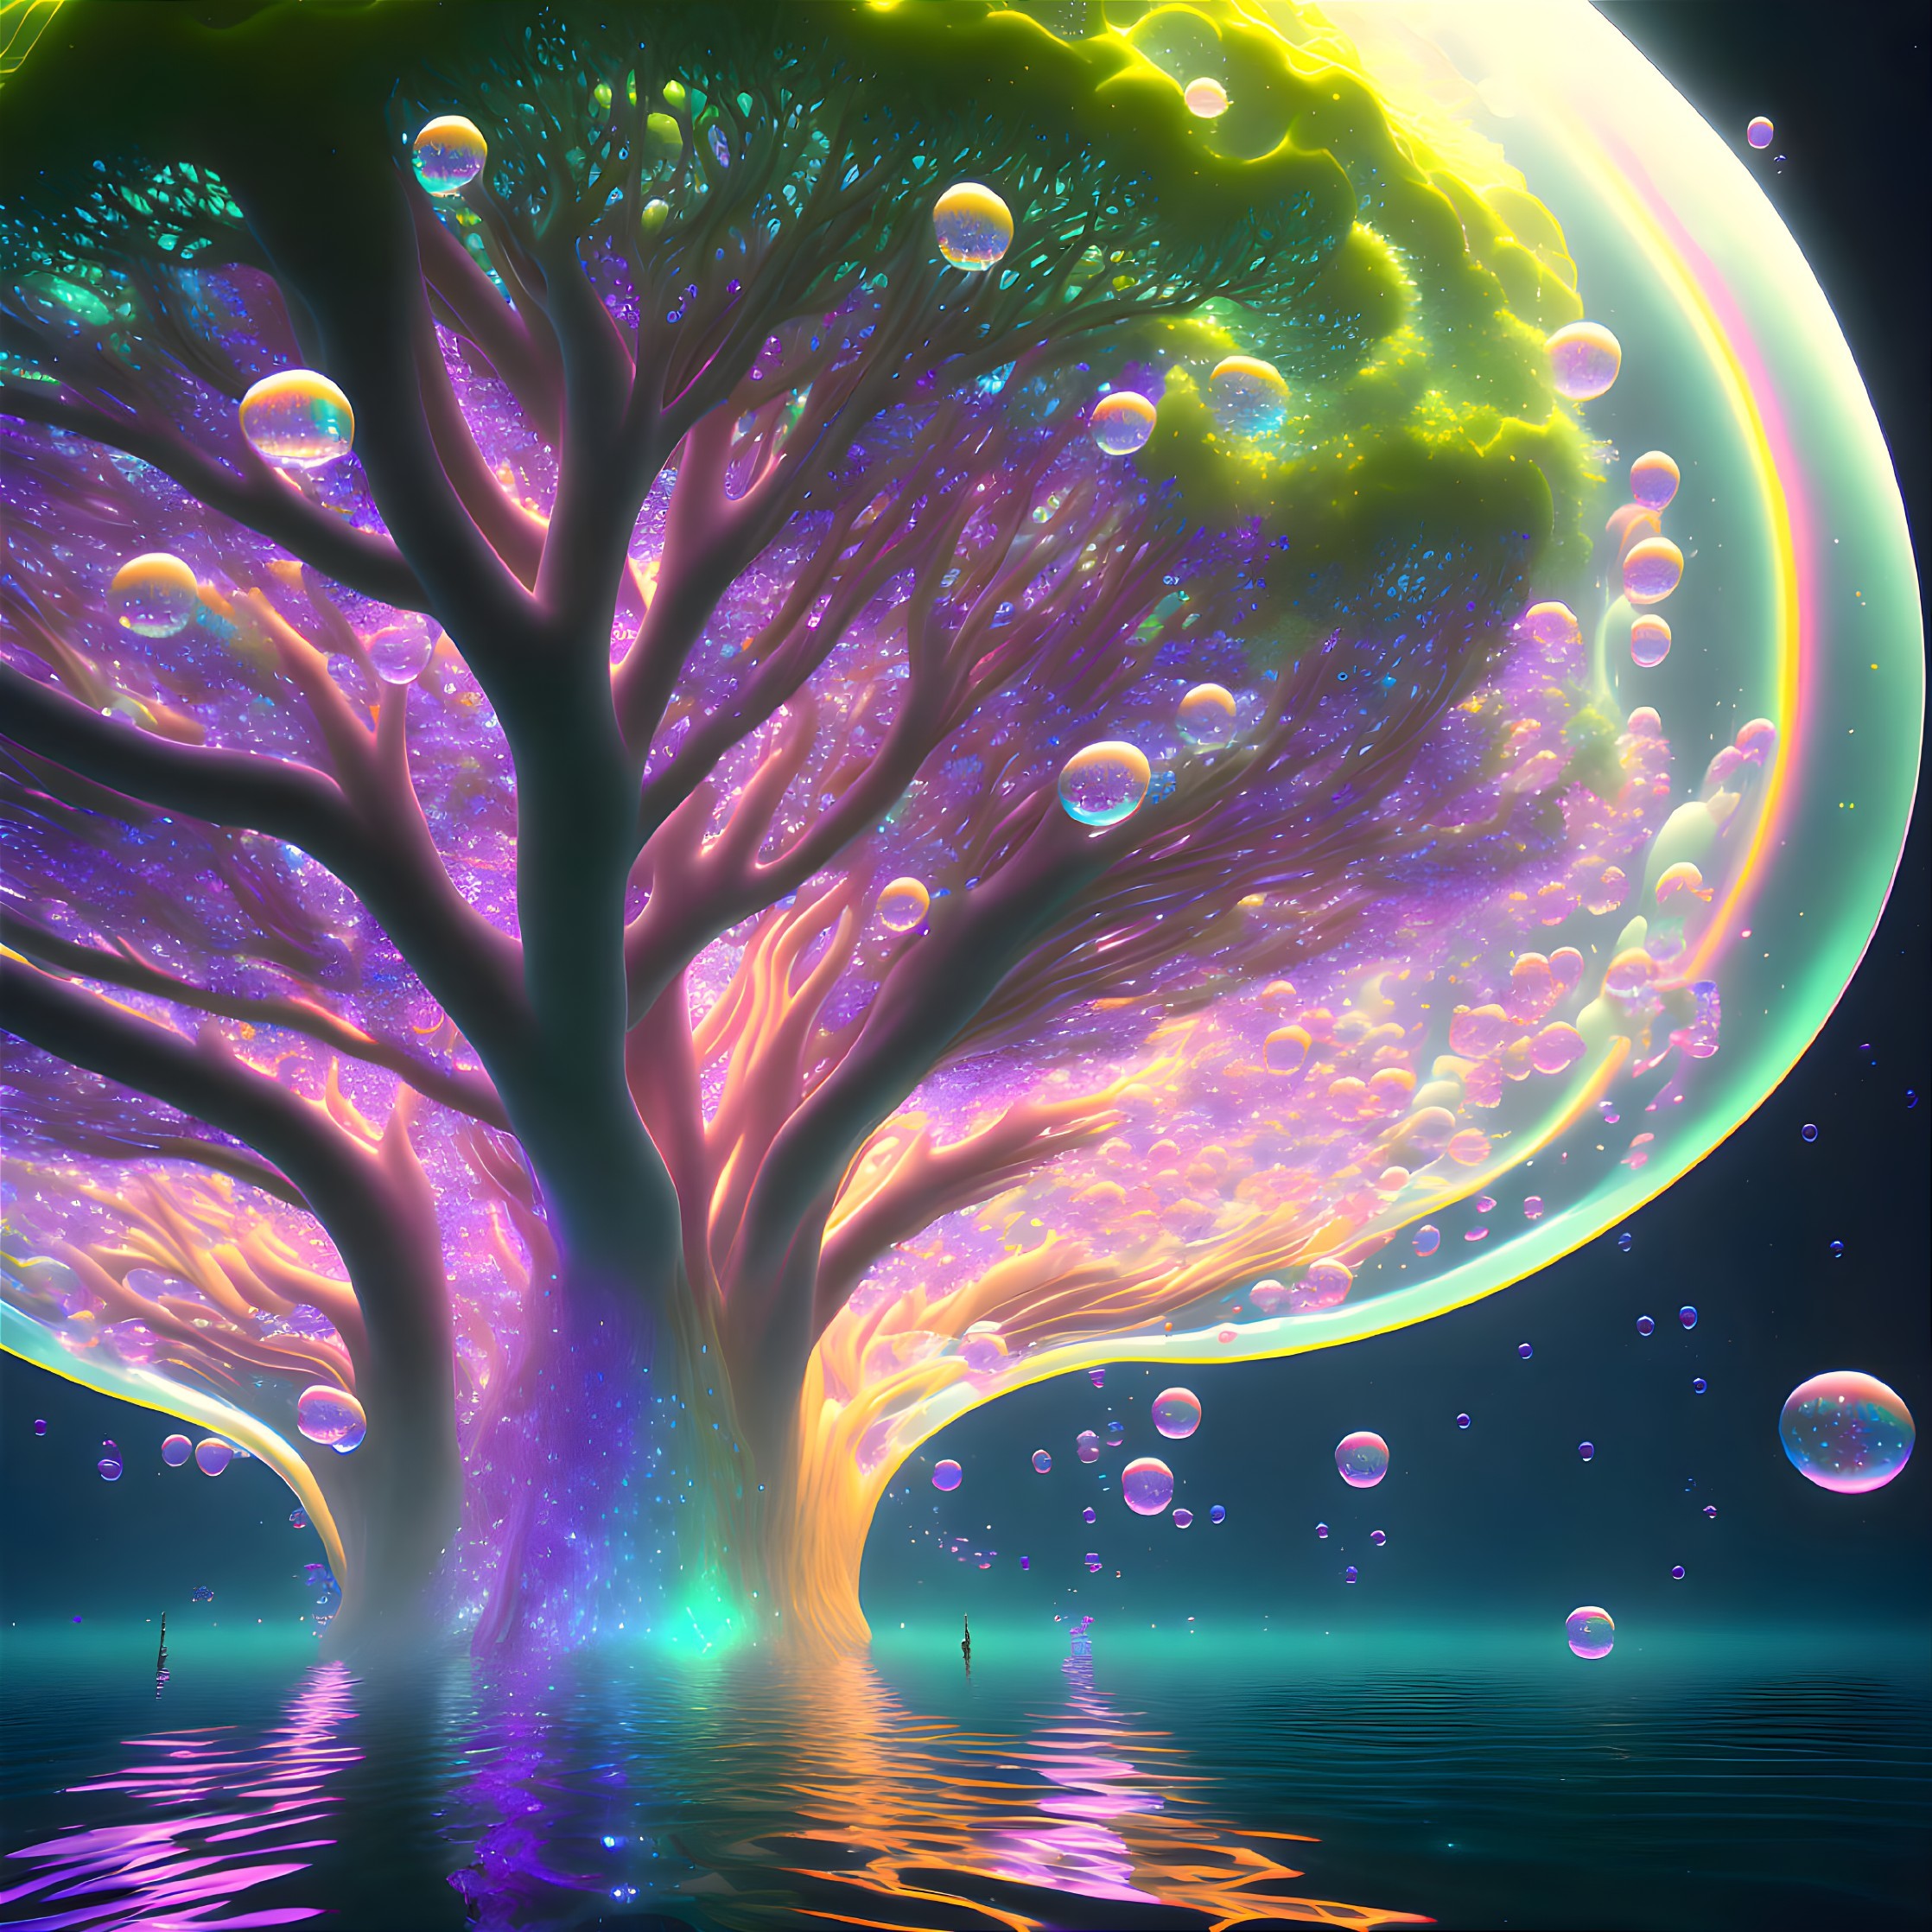 Ascension of souls at the luminous Tree of Life